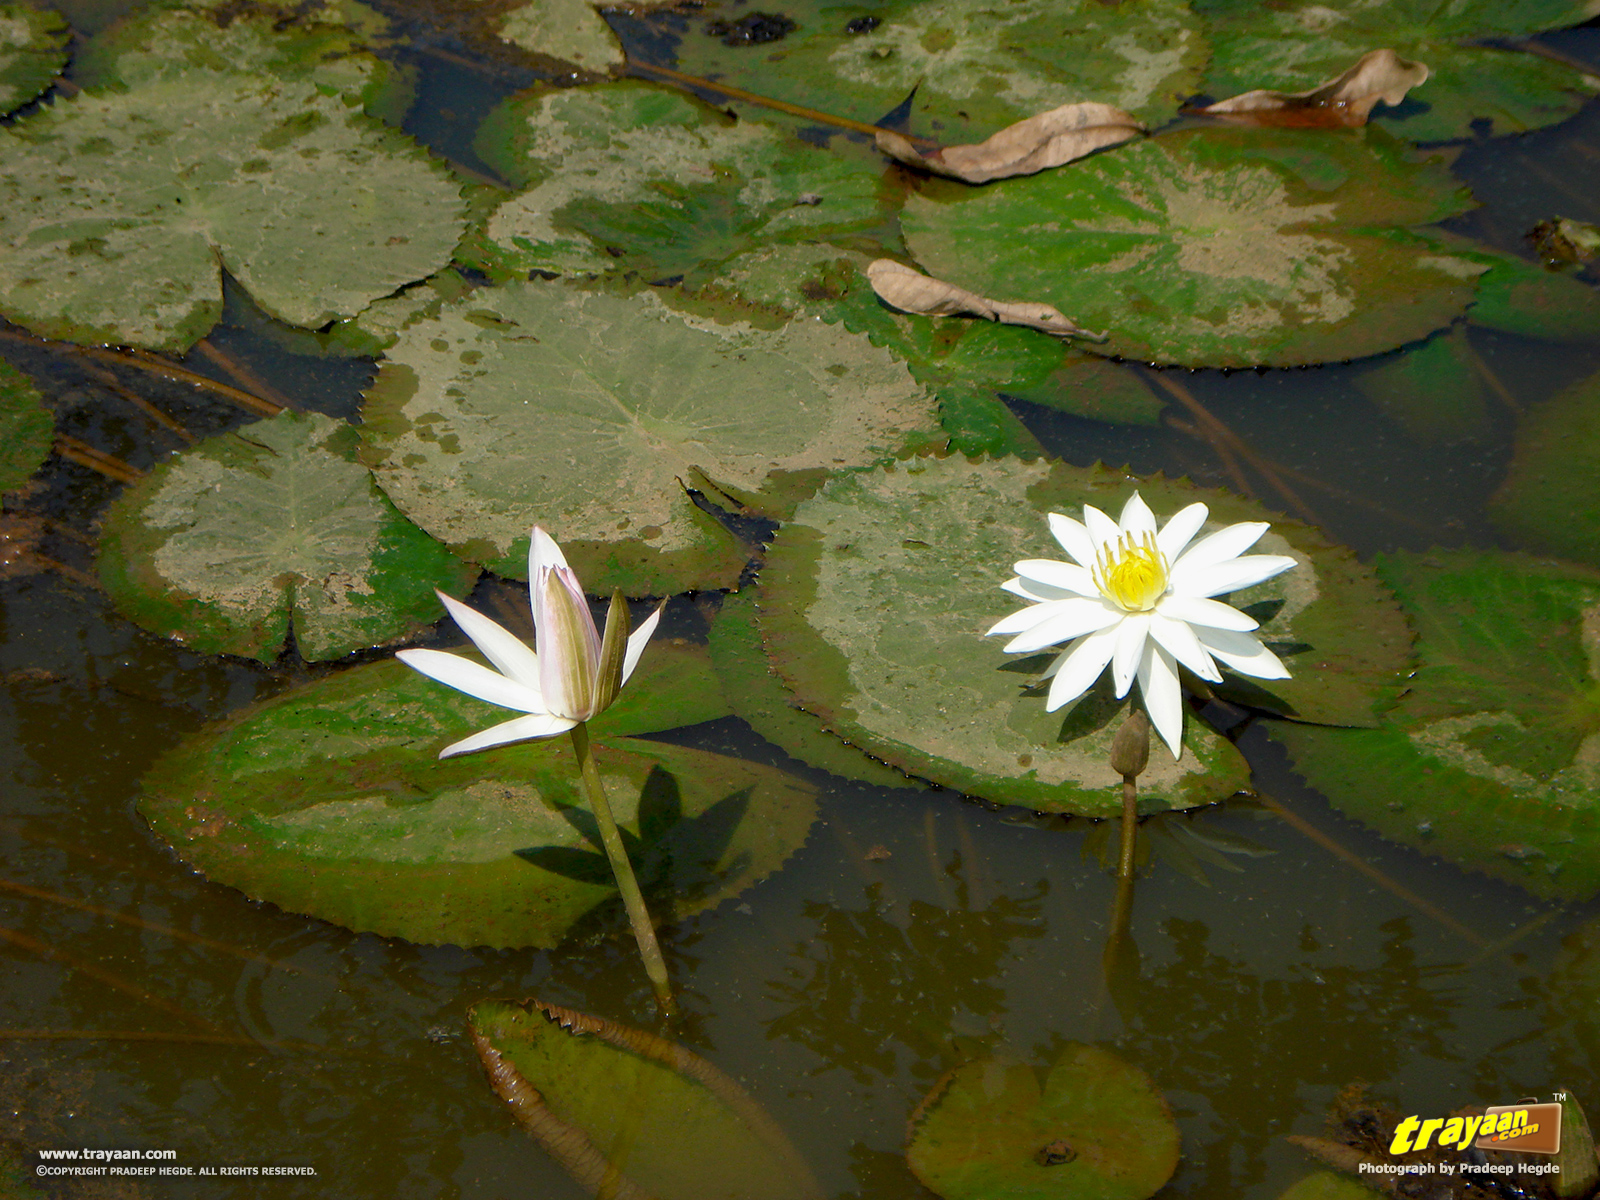 A sunny afternoon by a pond full of lovely water lilies - Trayaan